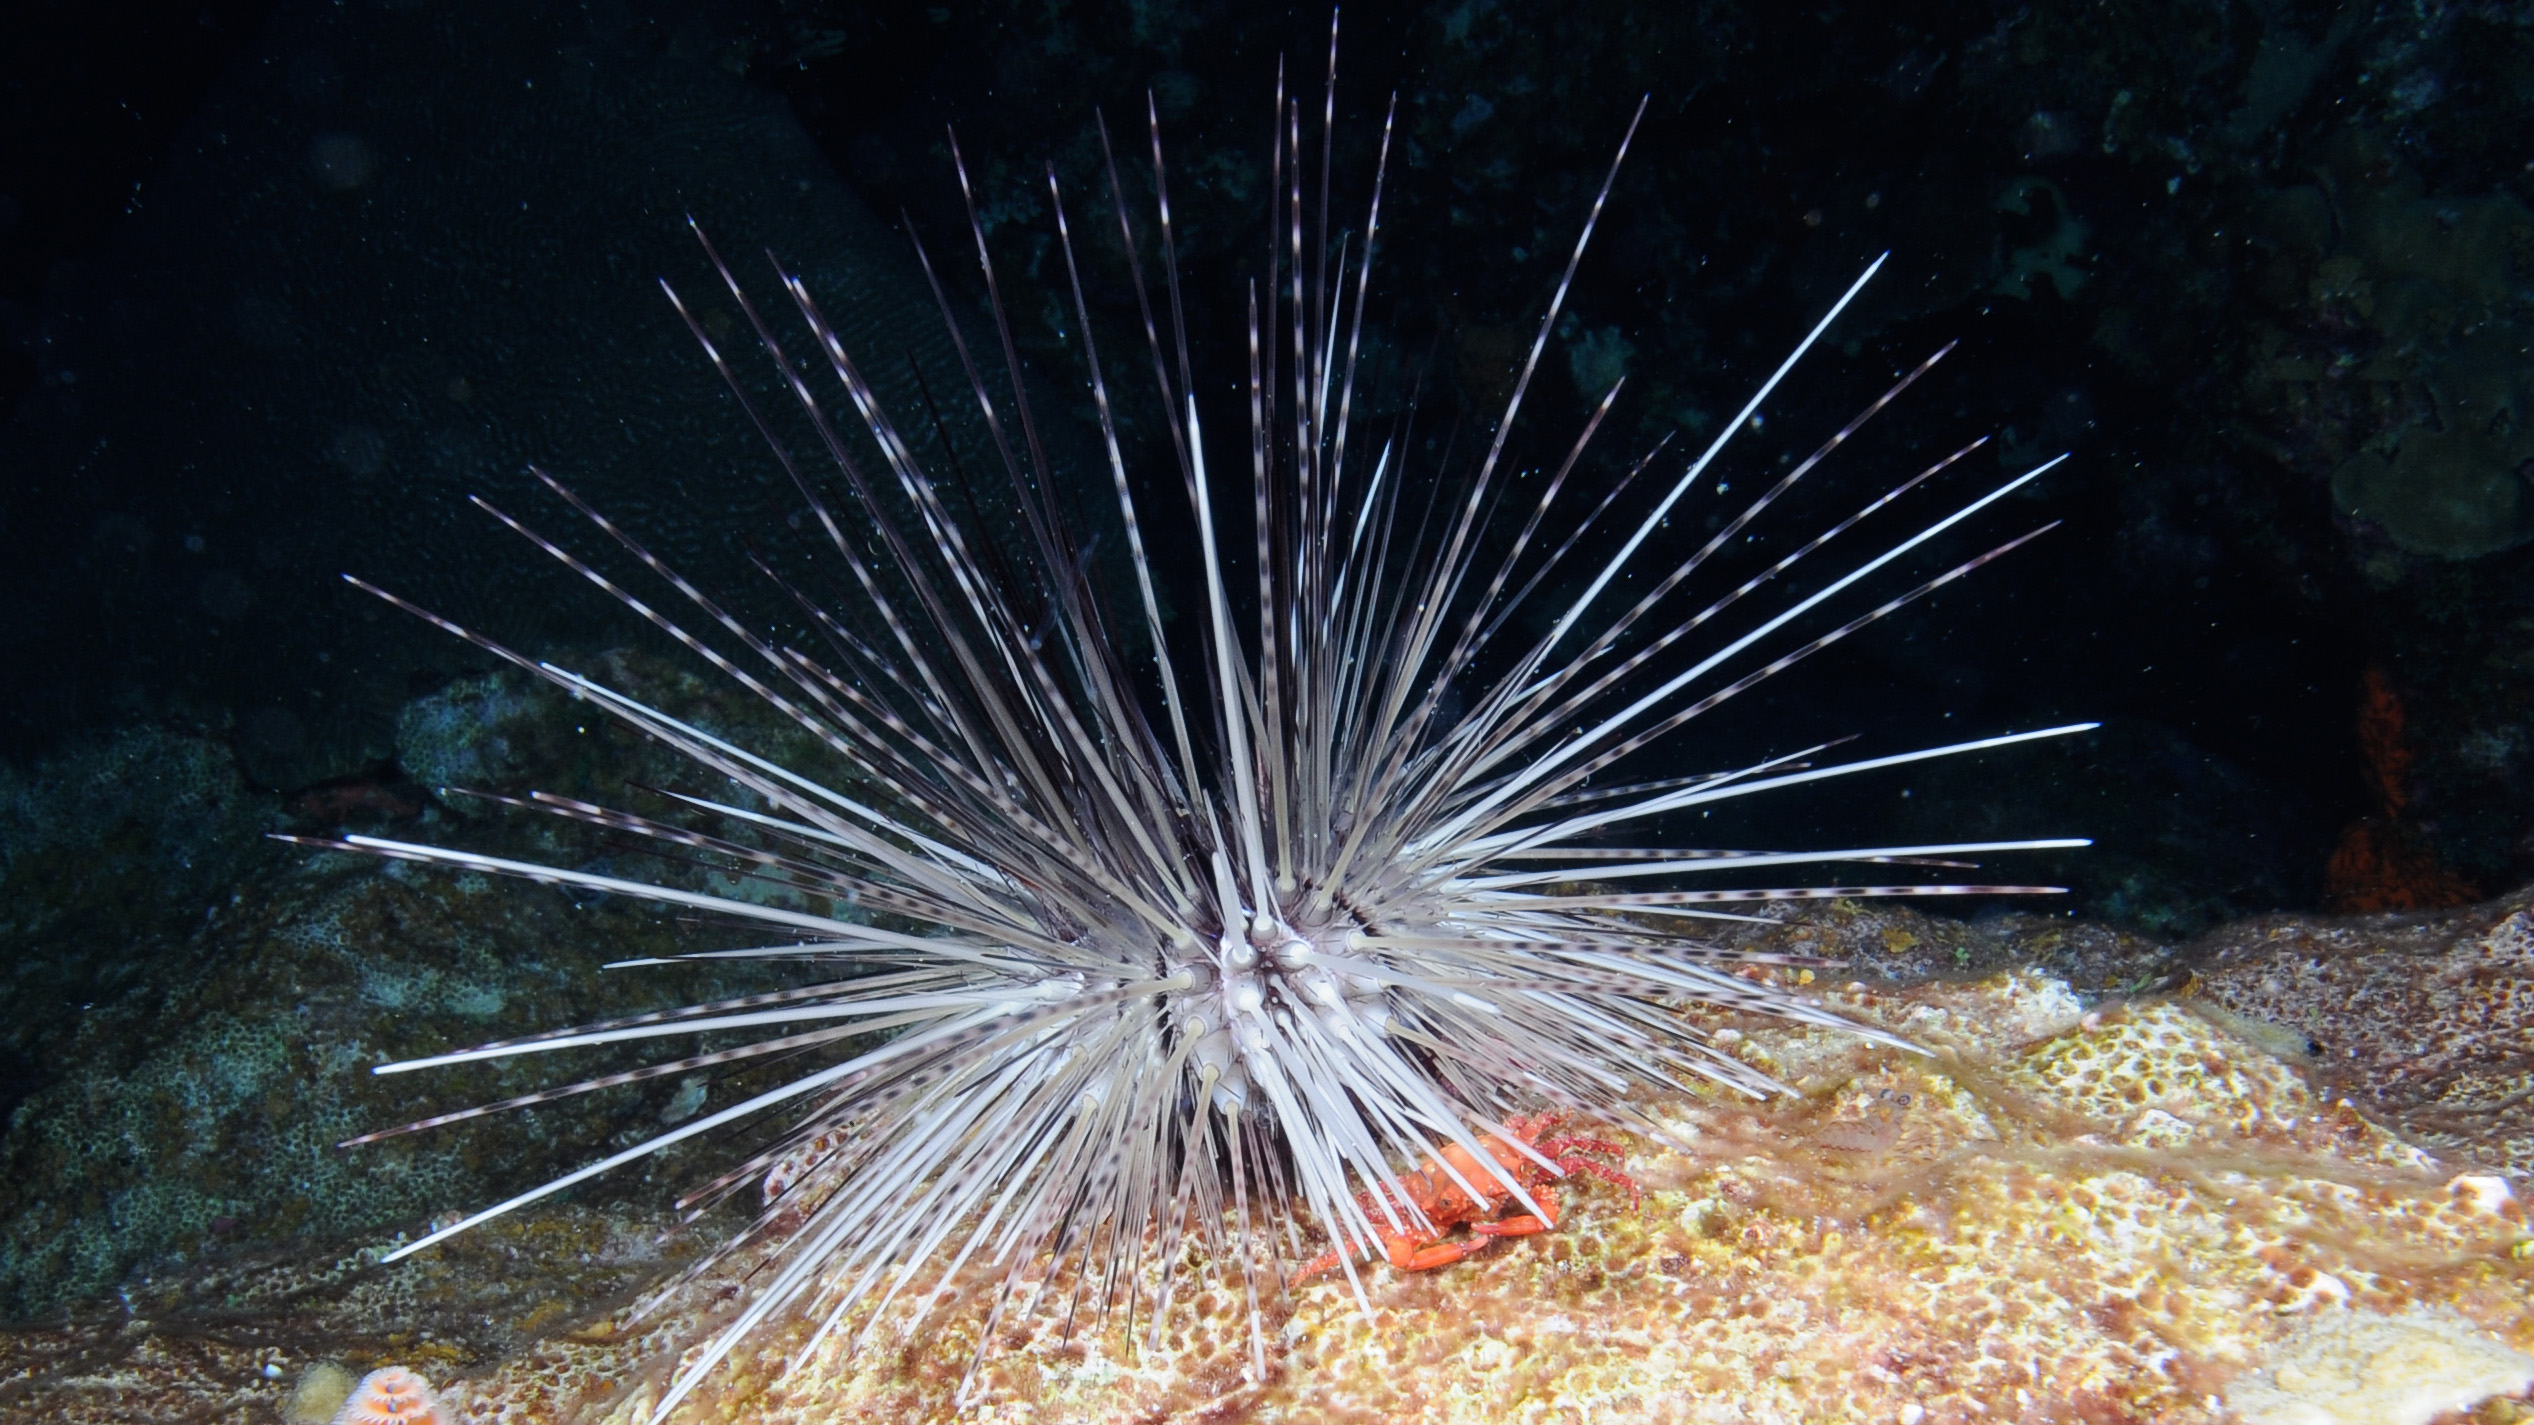 A mostly white Long-spined Urchin (Diadema antillarum) with a red crab resting under its spines